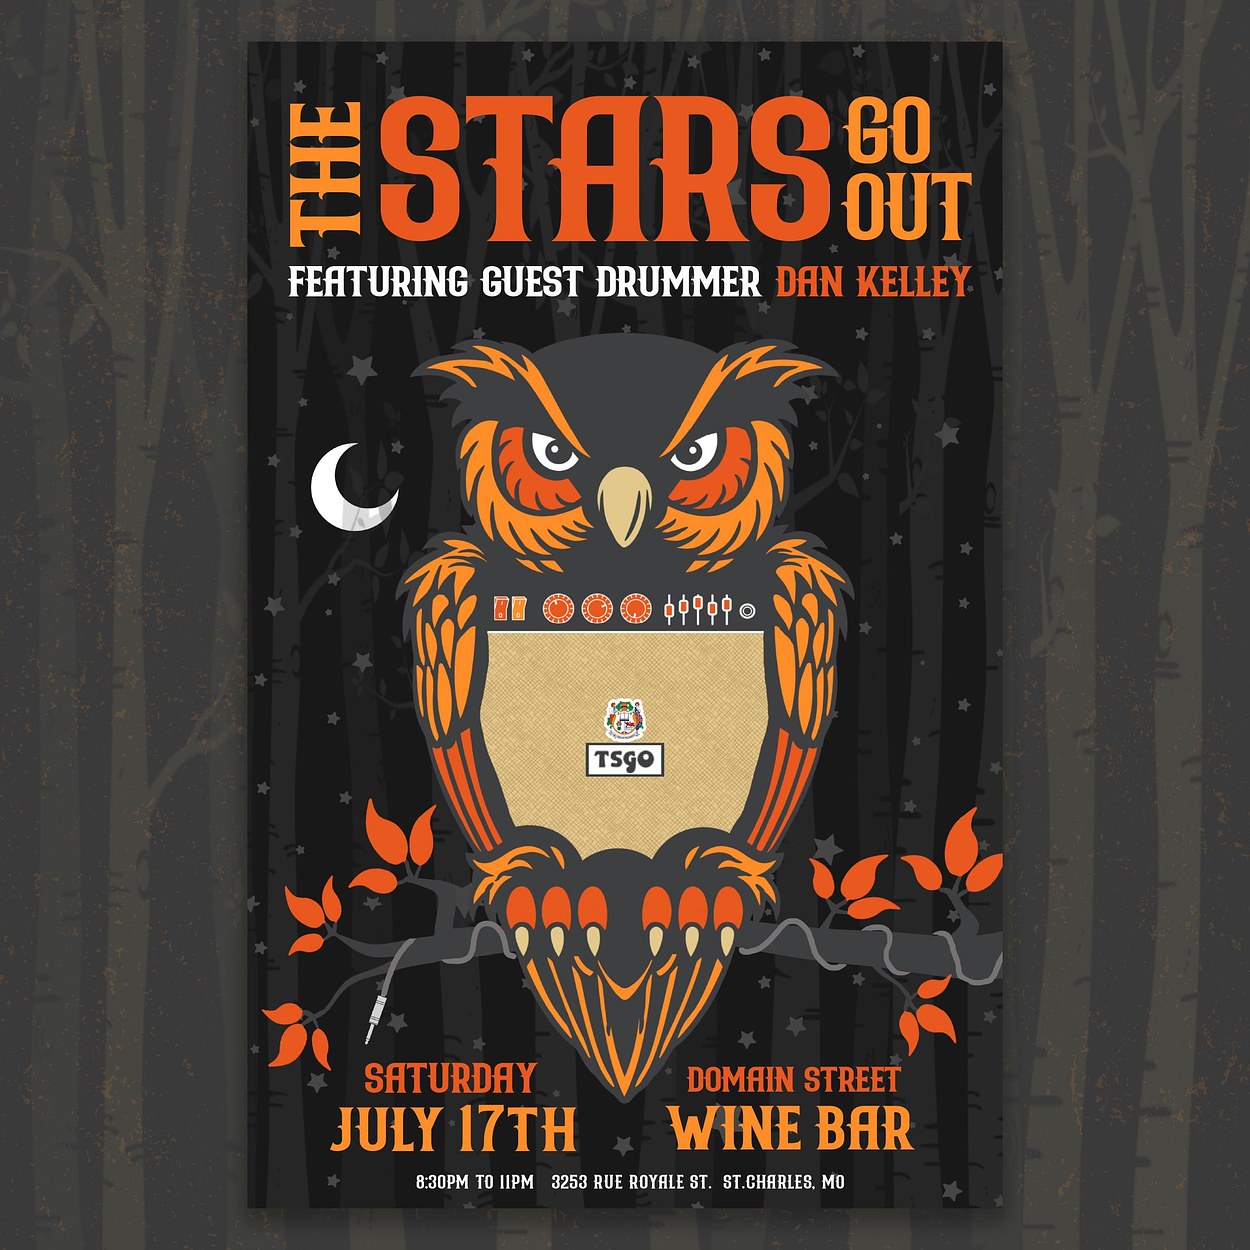 The Stars Go Out - Domain Street Show Poster